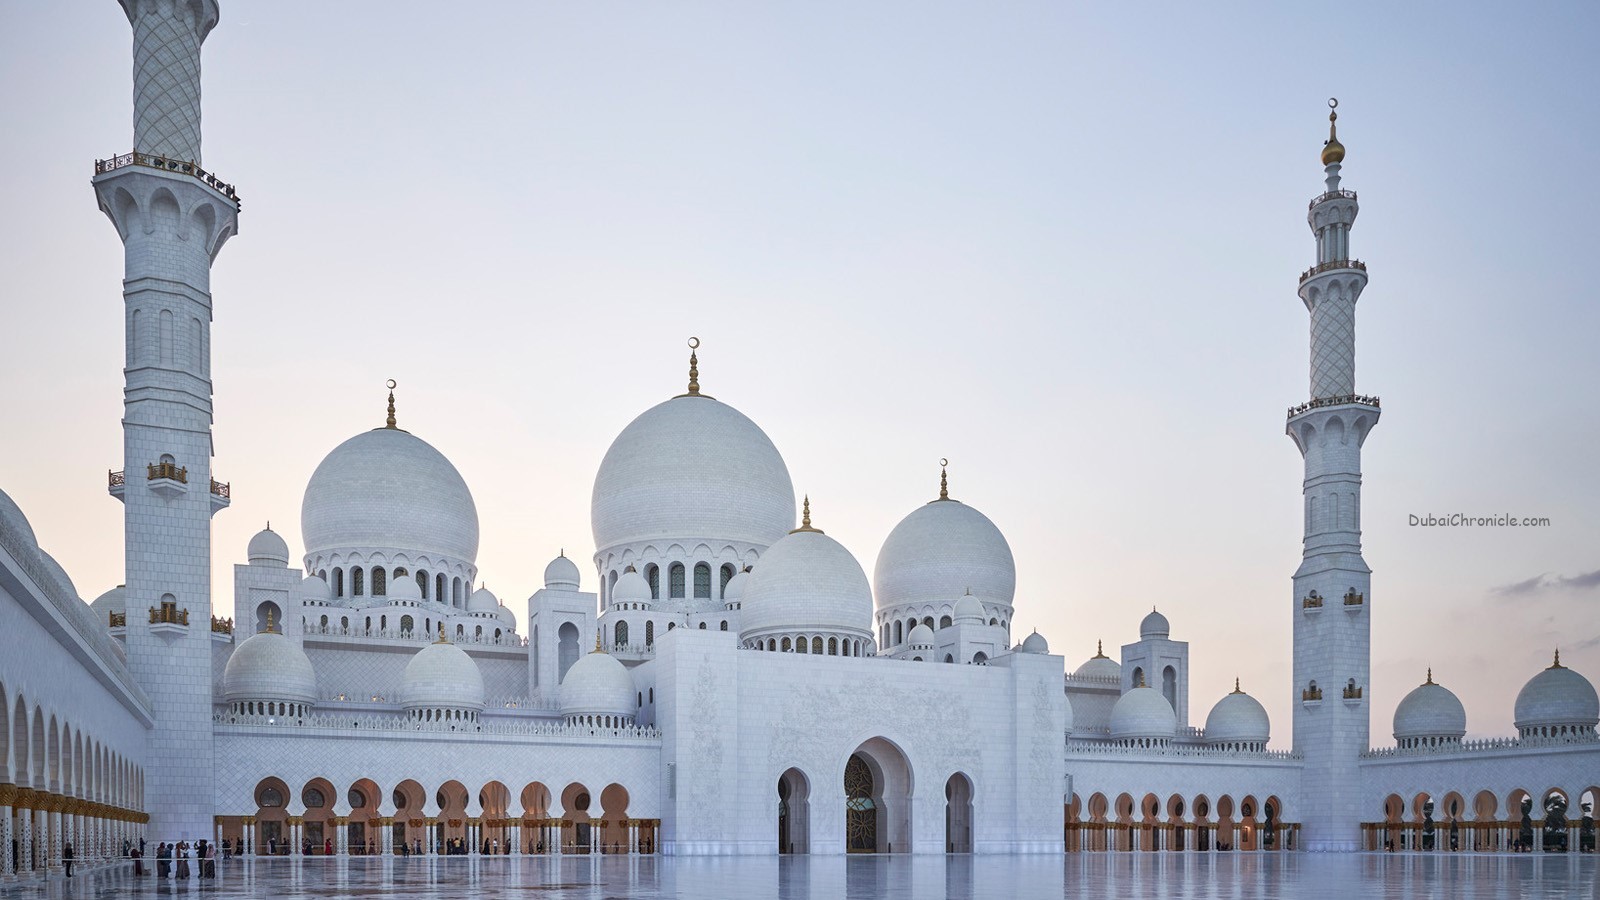 Abu Dhabi has developed into one of the world’s great cultural hubs